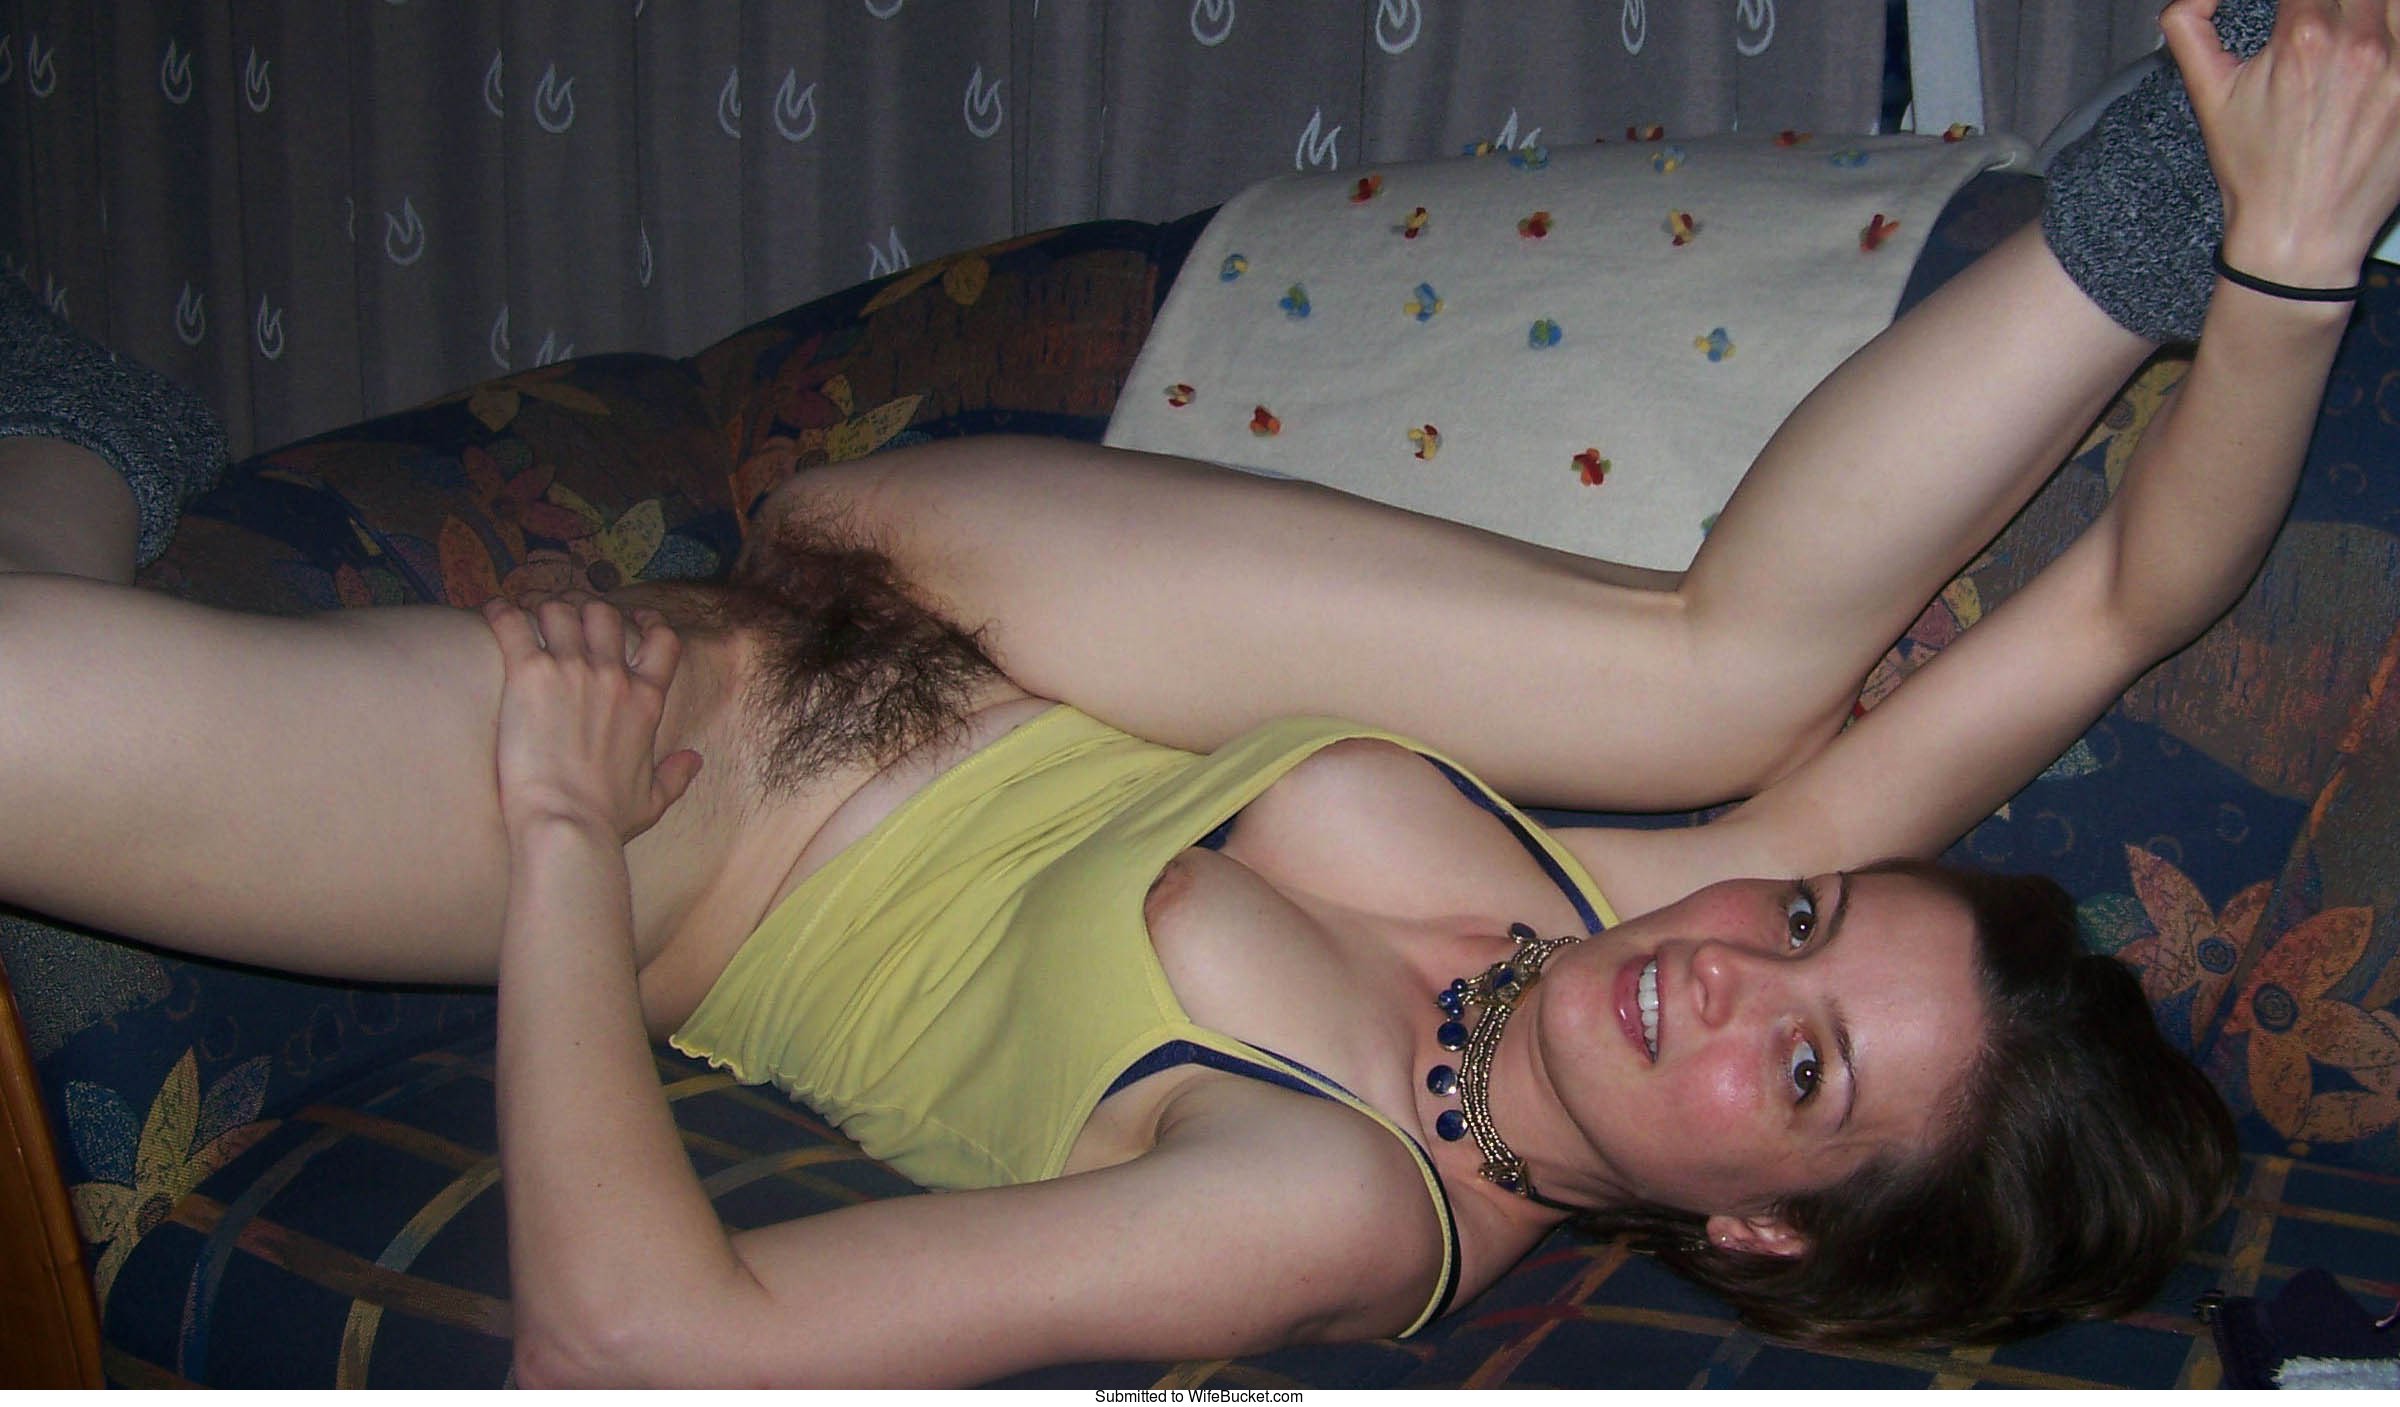 pics of hairy pussy amateur milfs